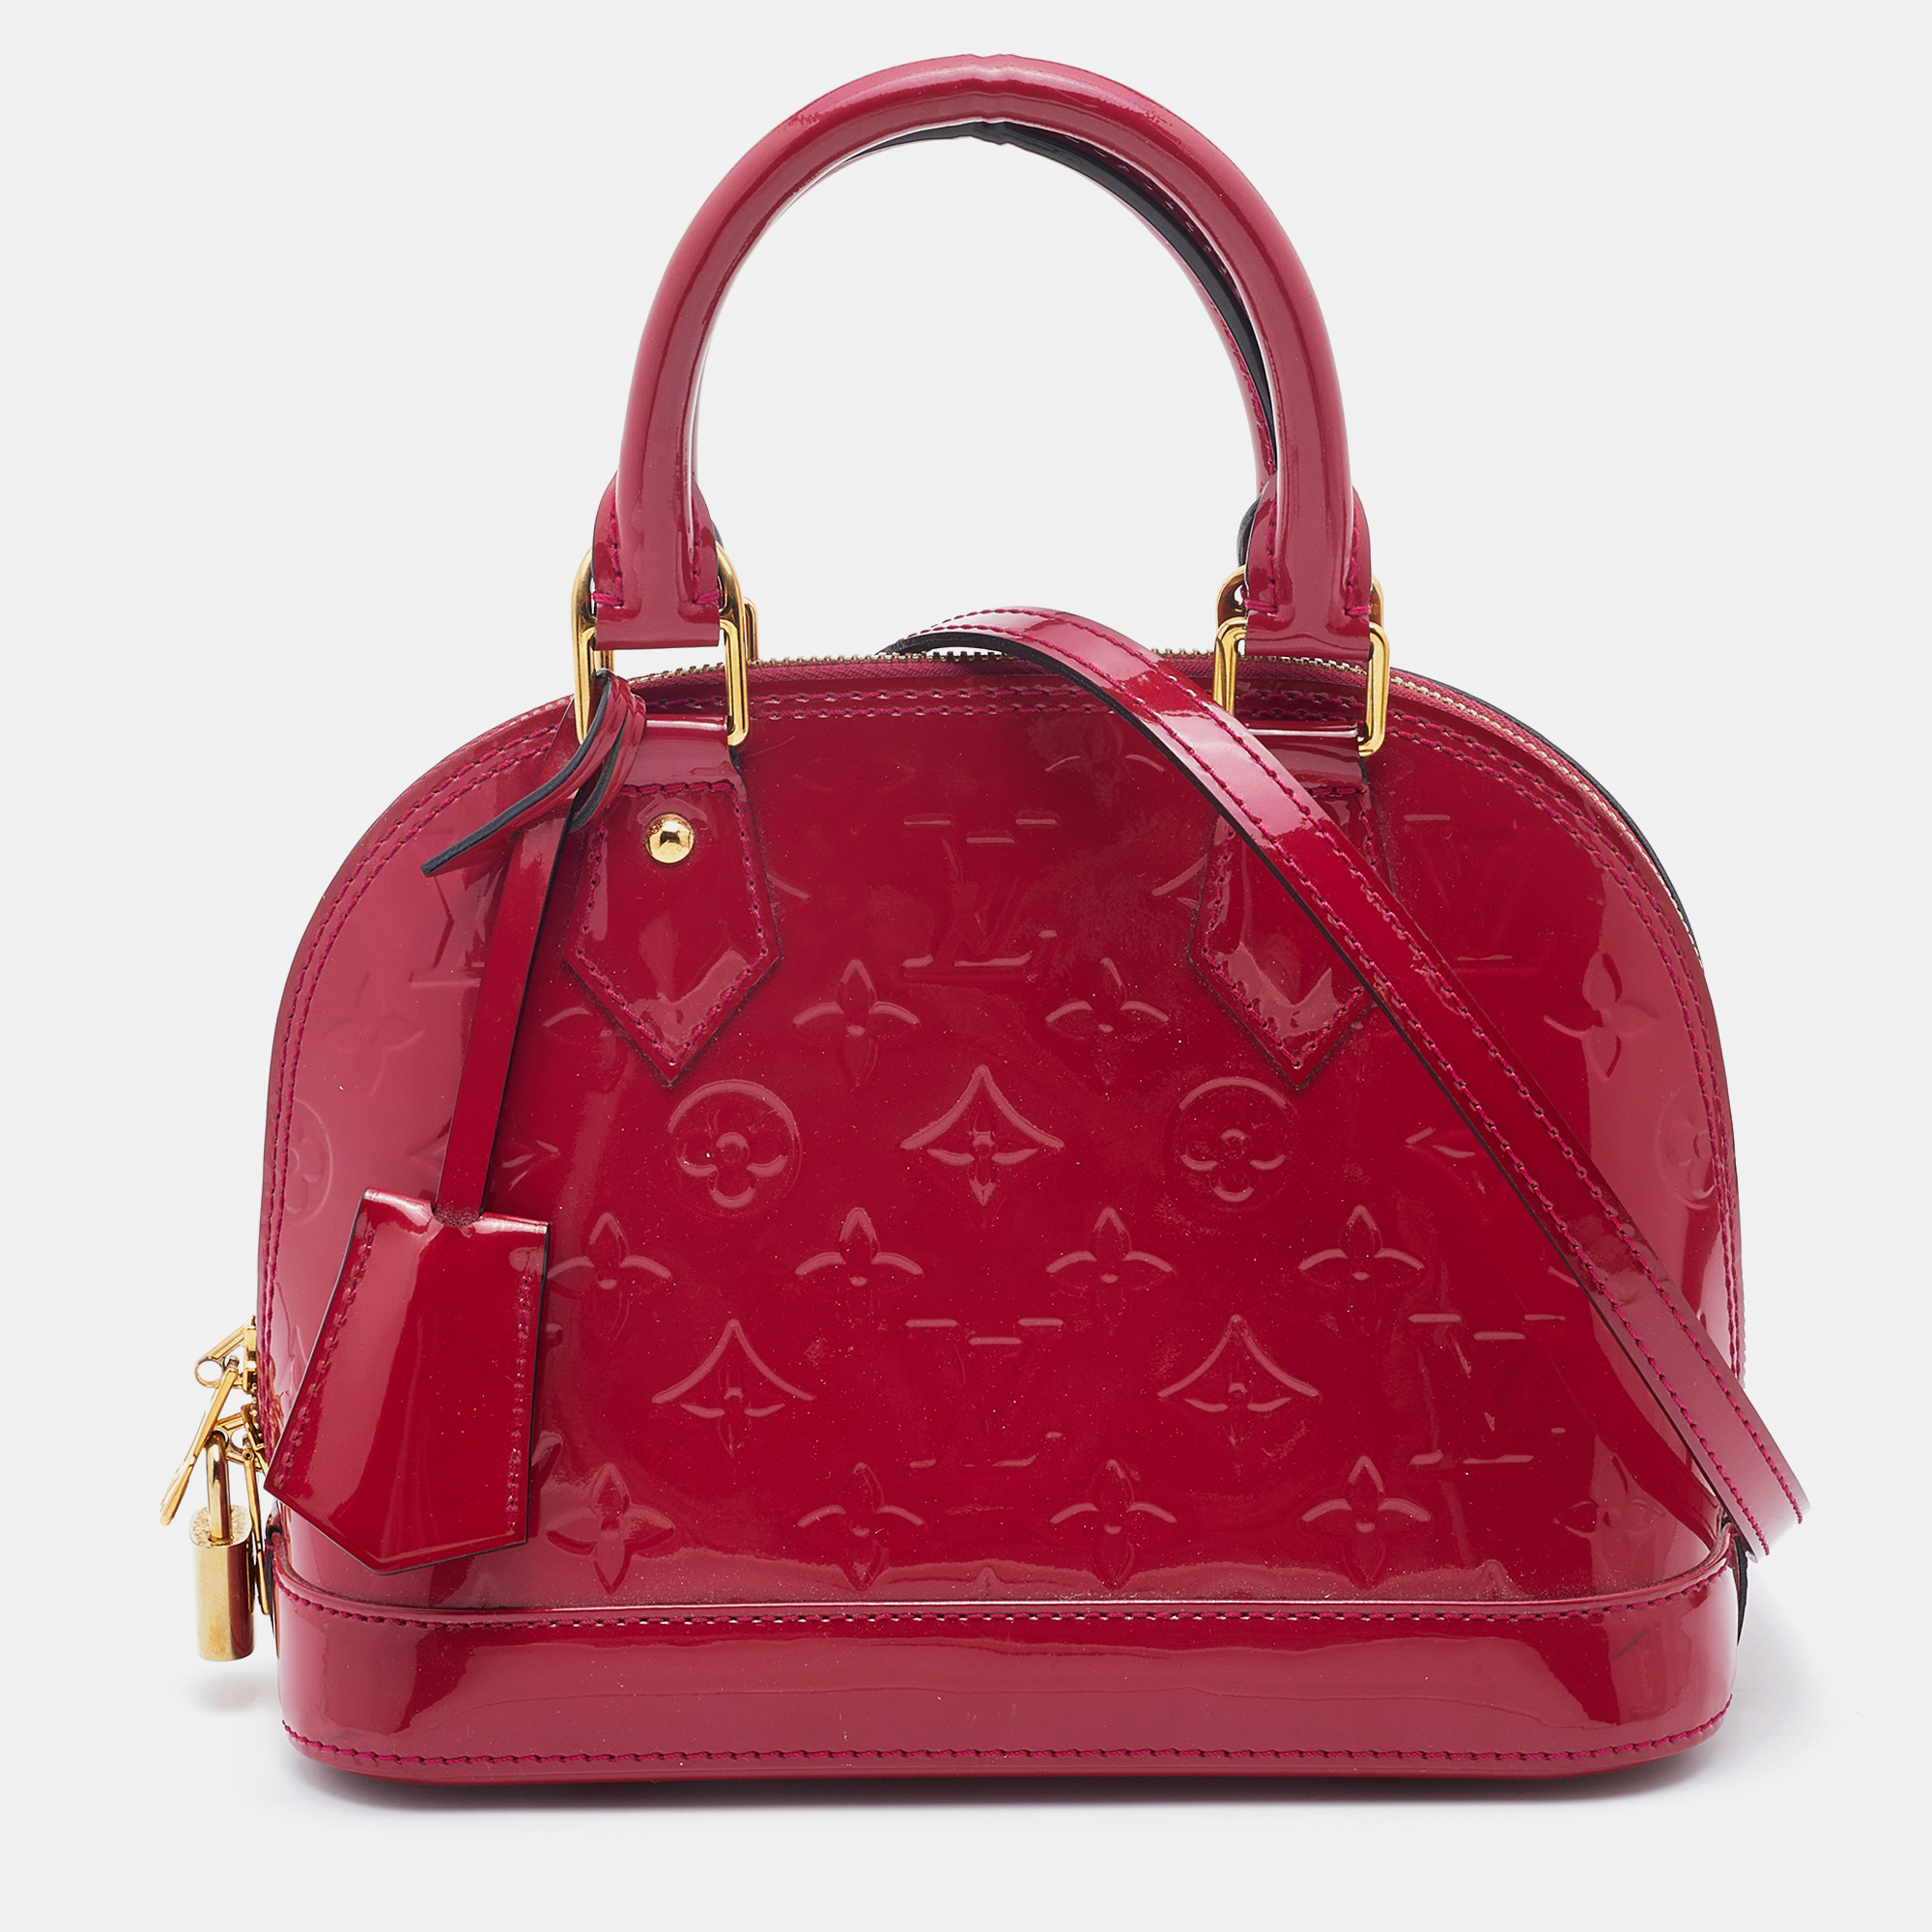 Buy Authentic Louis Vuitton Purse Online In India -  India